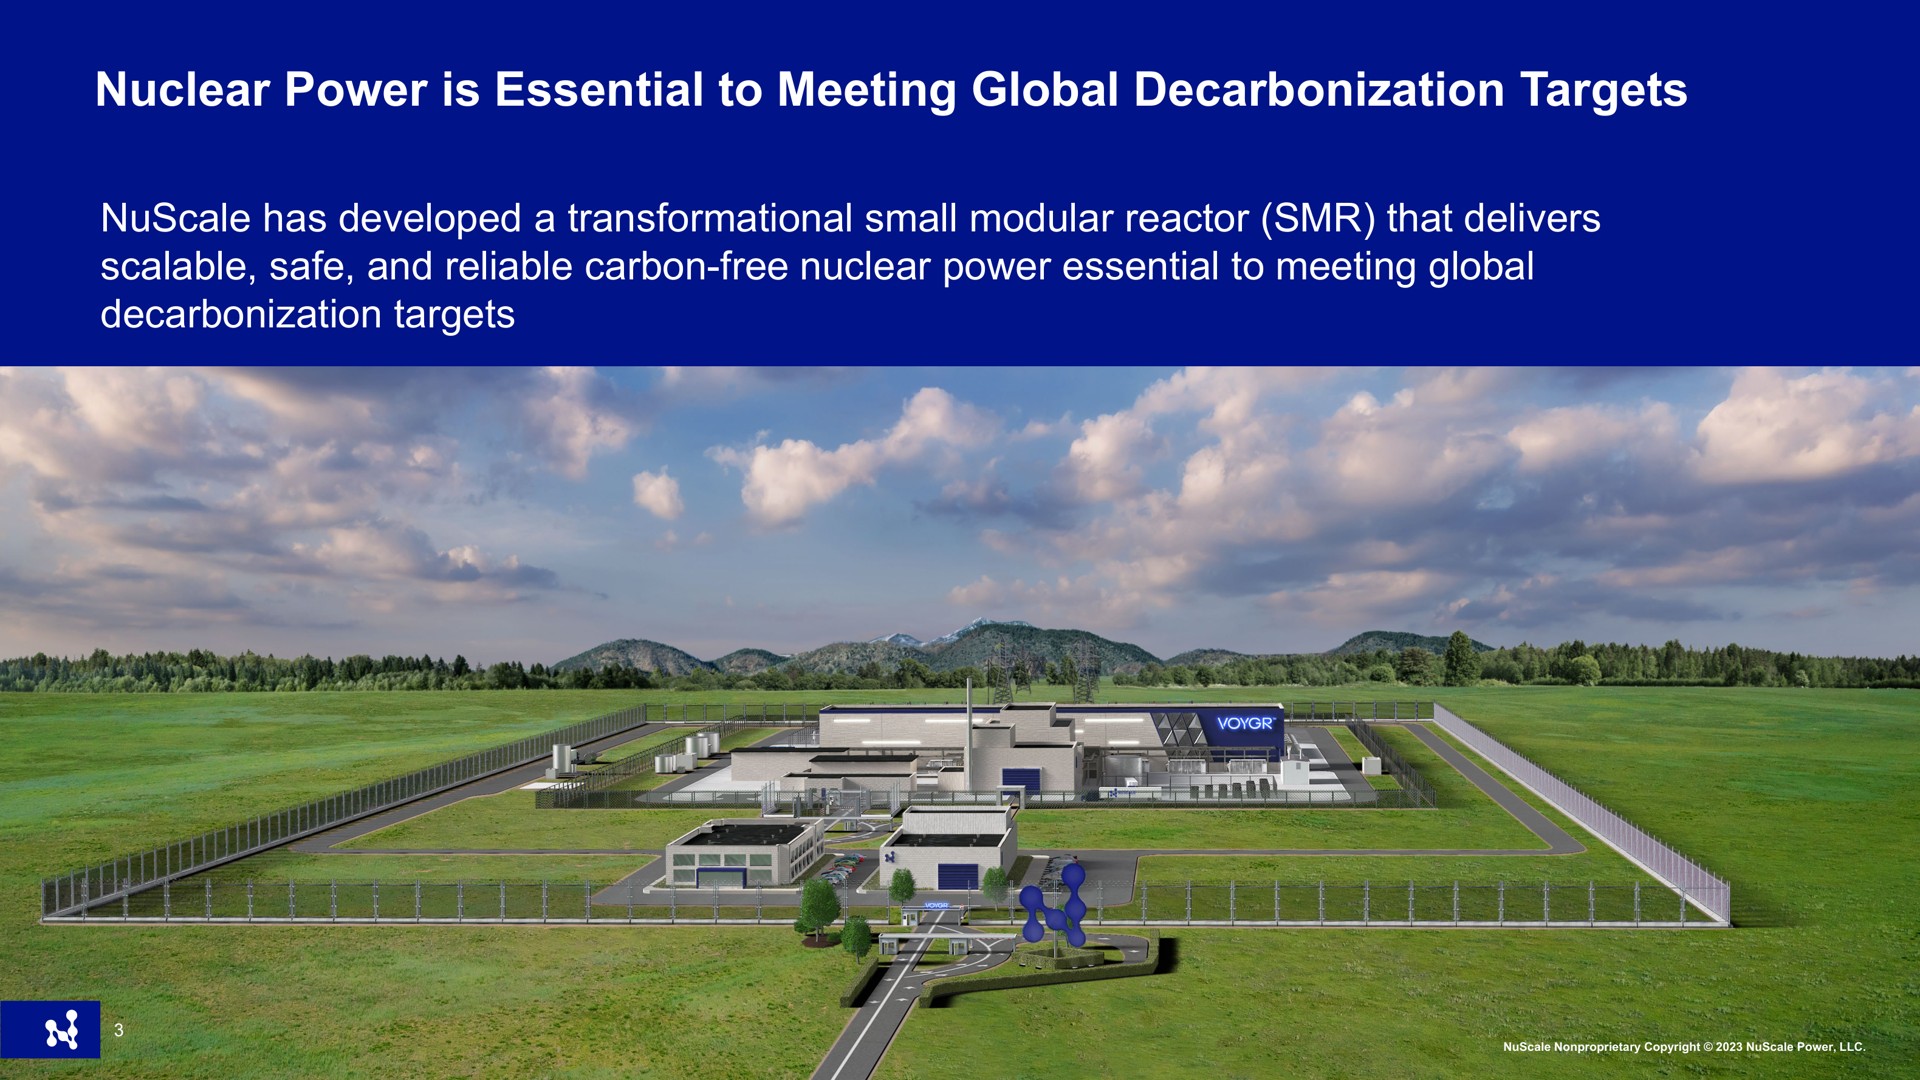 nuclear power is essential to meeting global decarbonization targets has developed a small modular reactor that delivers scalable safe and reliable carbon free nuclear power essential to meeting global decarbonization targets | Nuscale